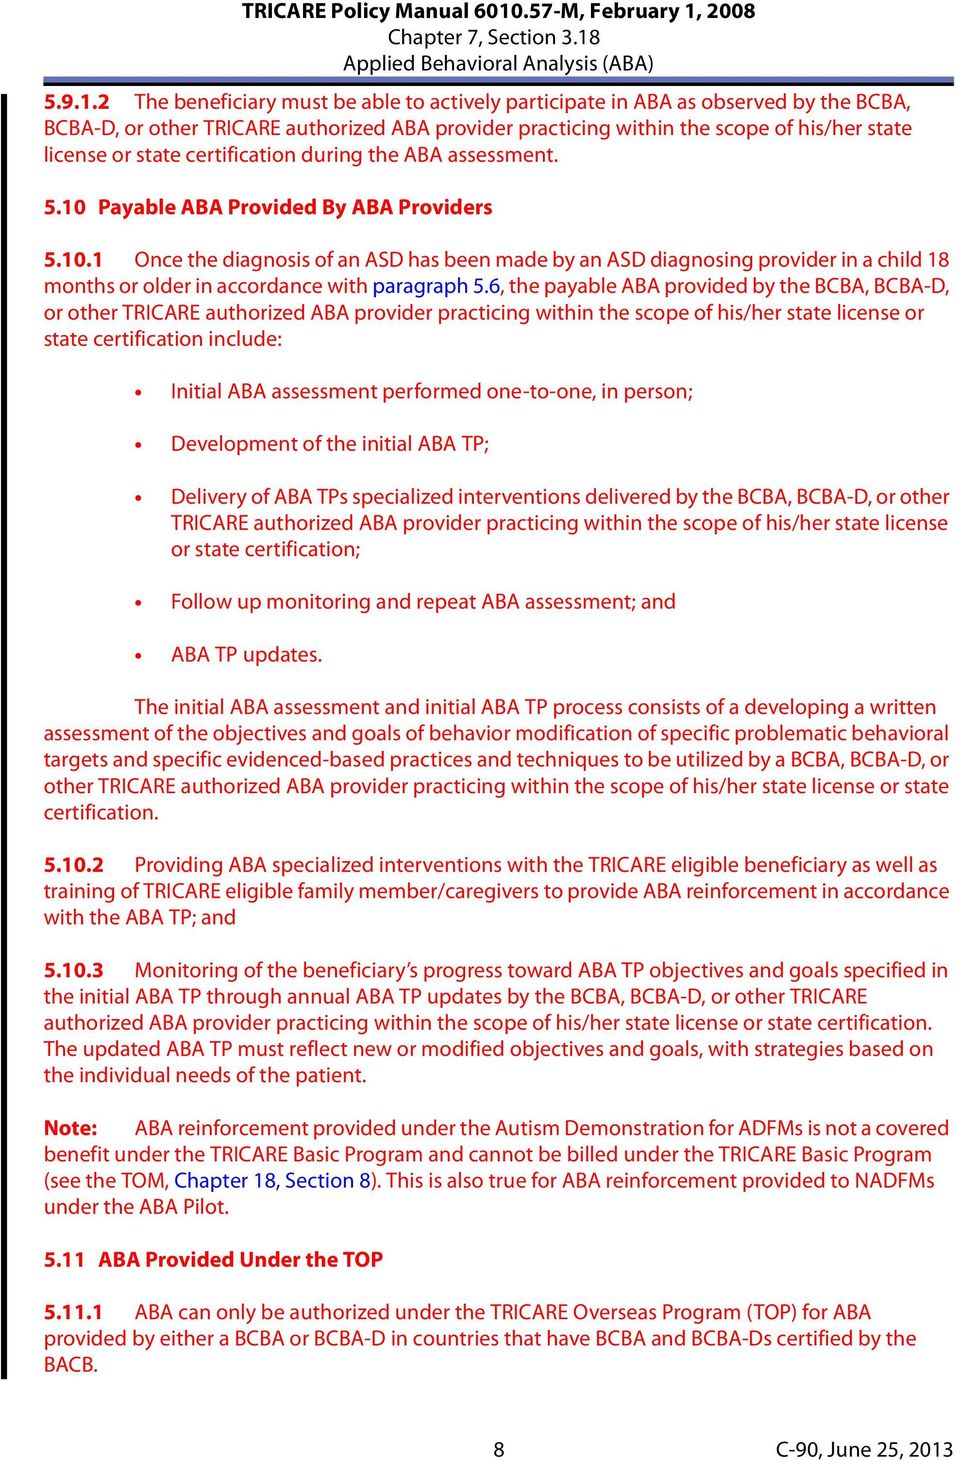 certification during the ABA assessment. 5.10 Payable ABA Provided By ABA Providers 5.10.1 Once the diagnosis of an ASD has been made by an ASD diagnosing provider in a child 18 months or older in accordance with paragraph 5.